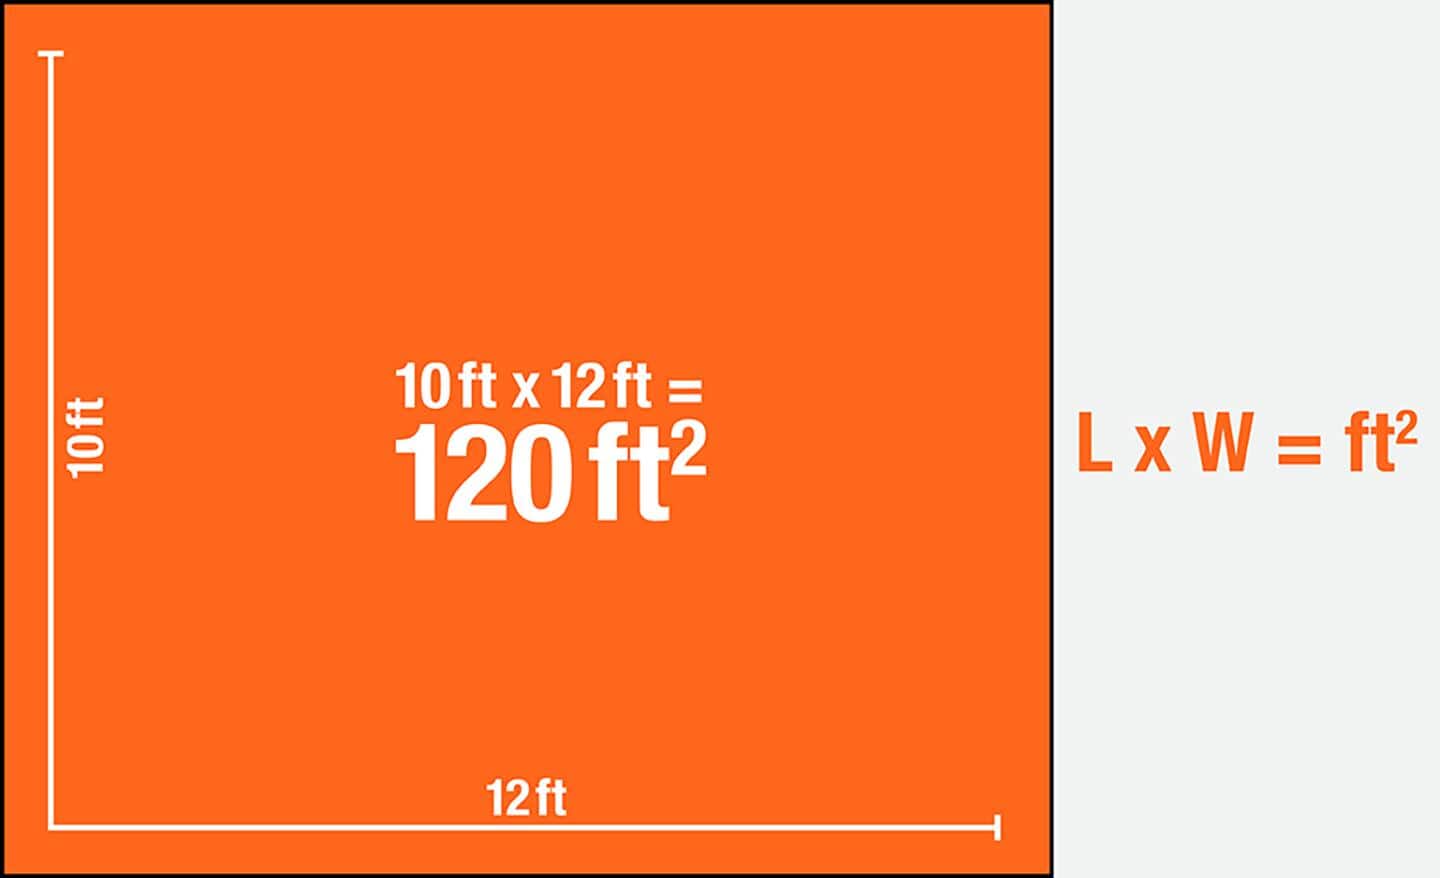 Length times width equals the square footage of tile needed for a project.